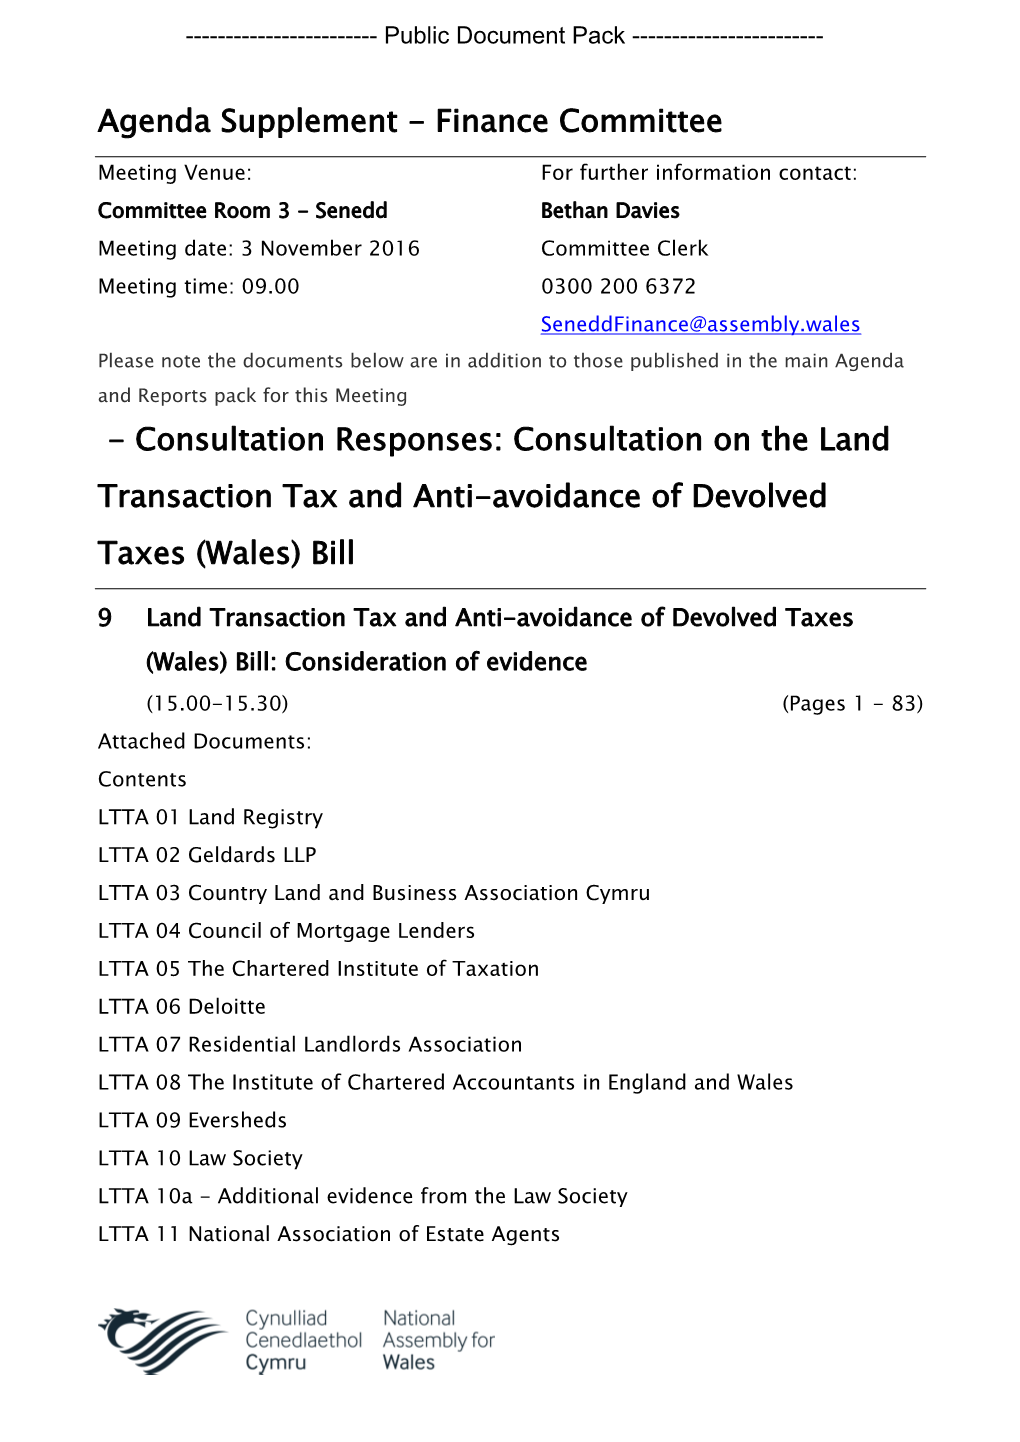 Consultation on the Land Transaction Tax and Anti-Avoidance of Devolved Taxes (Wales) Bill